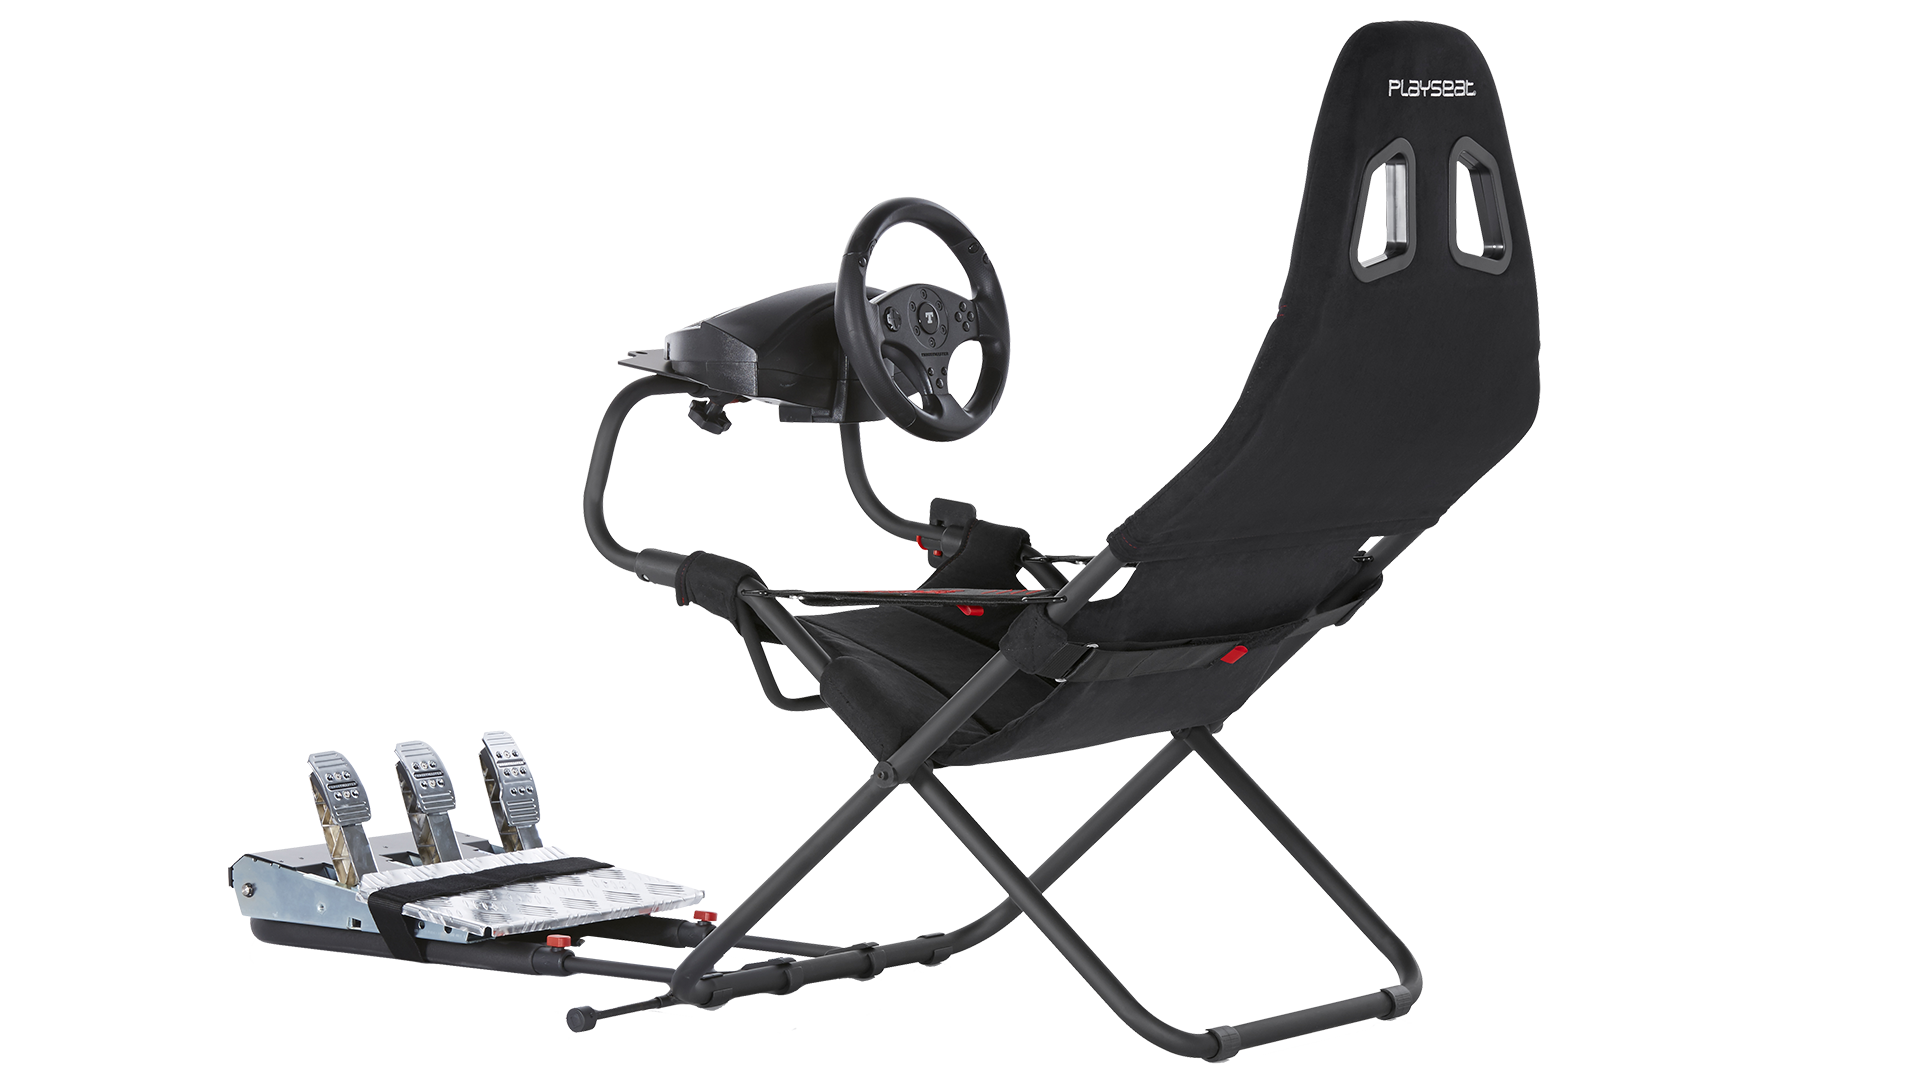 Playseat Challenge - Bargain Gaming Chair OR Expensive Deck Chair? – Upshift